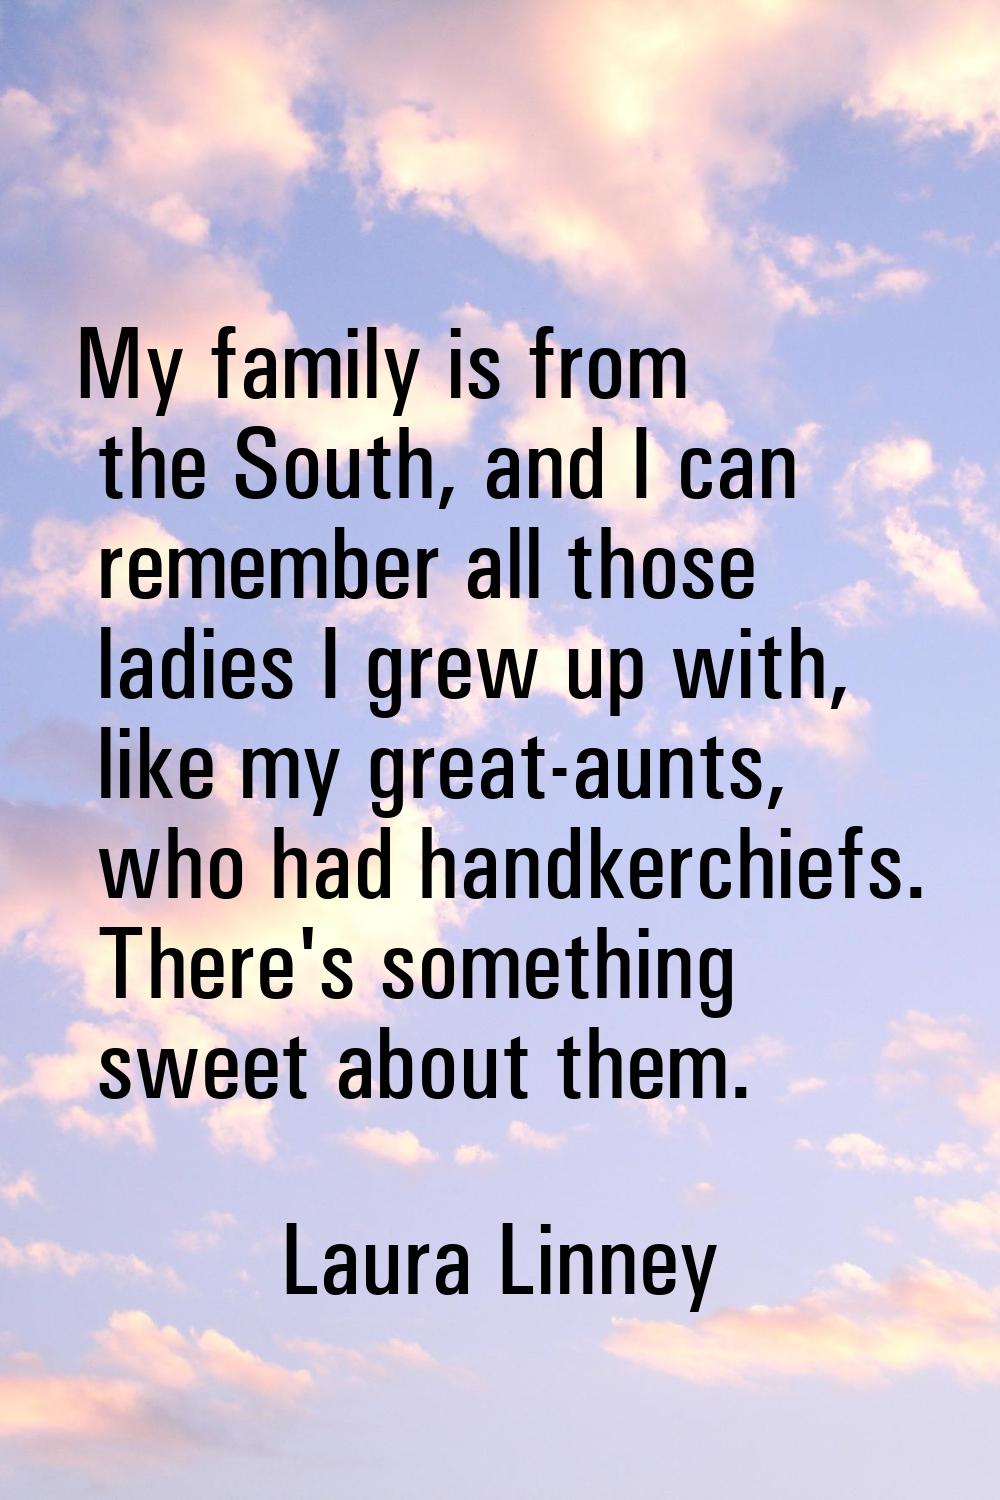 My family is from the South, and I can remember all those ladies I grew up with, like my great-aunt